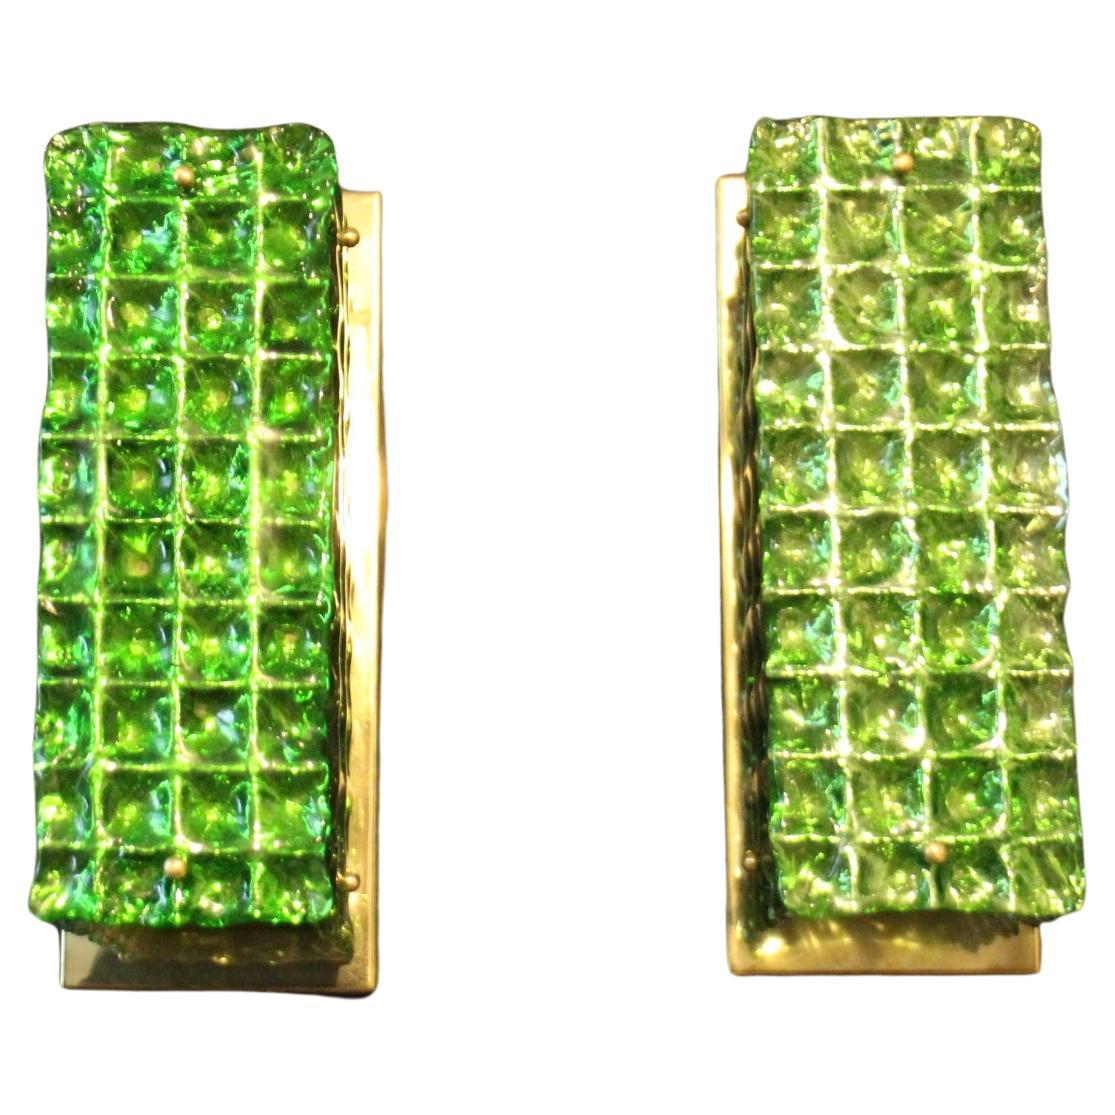 Pair of Emerald Green Textured Murano Glass Wall Lights , Mazzega Style  For Sale